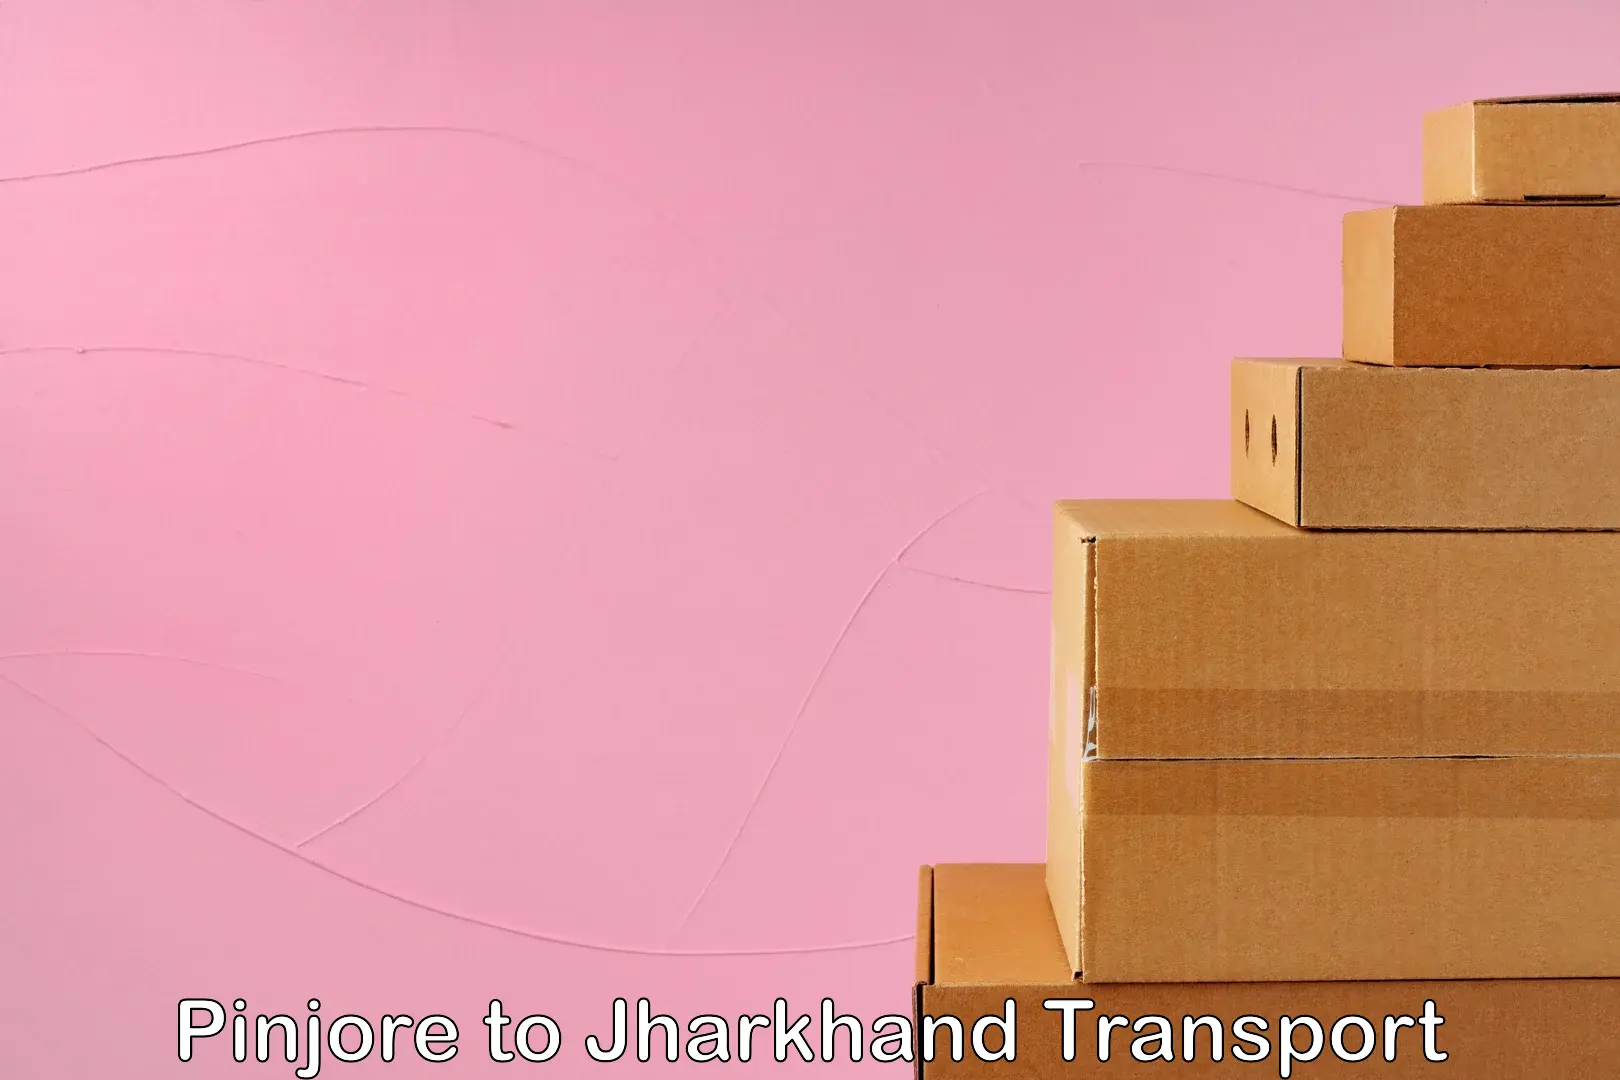 Cycle transportation service Pinjore to Jharkhand